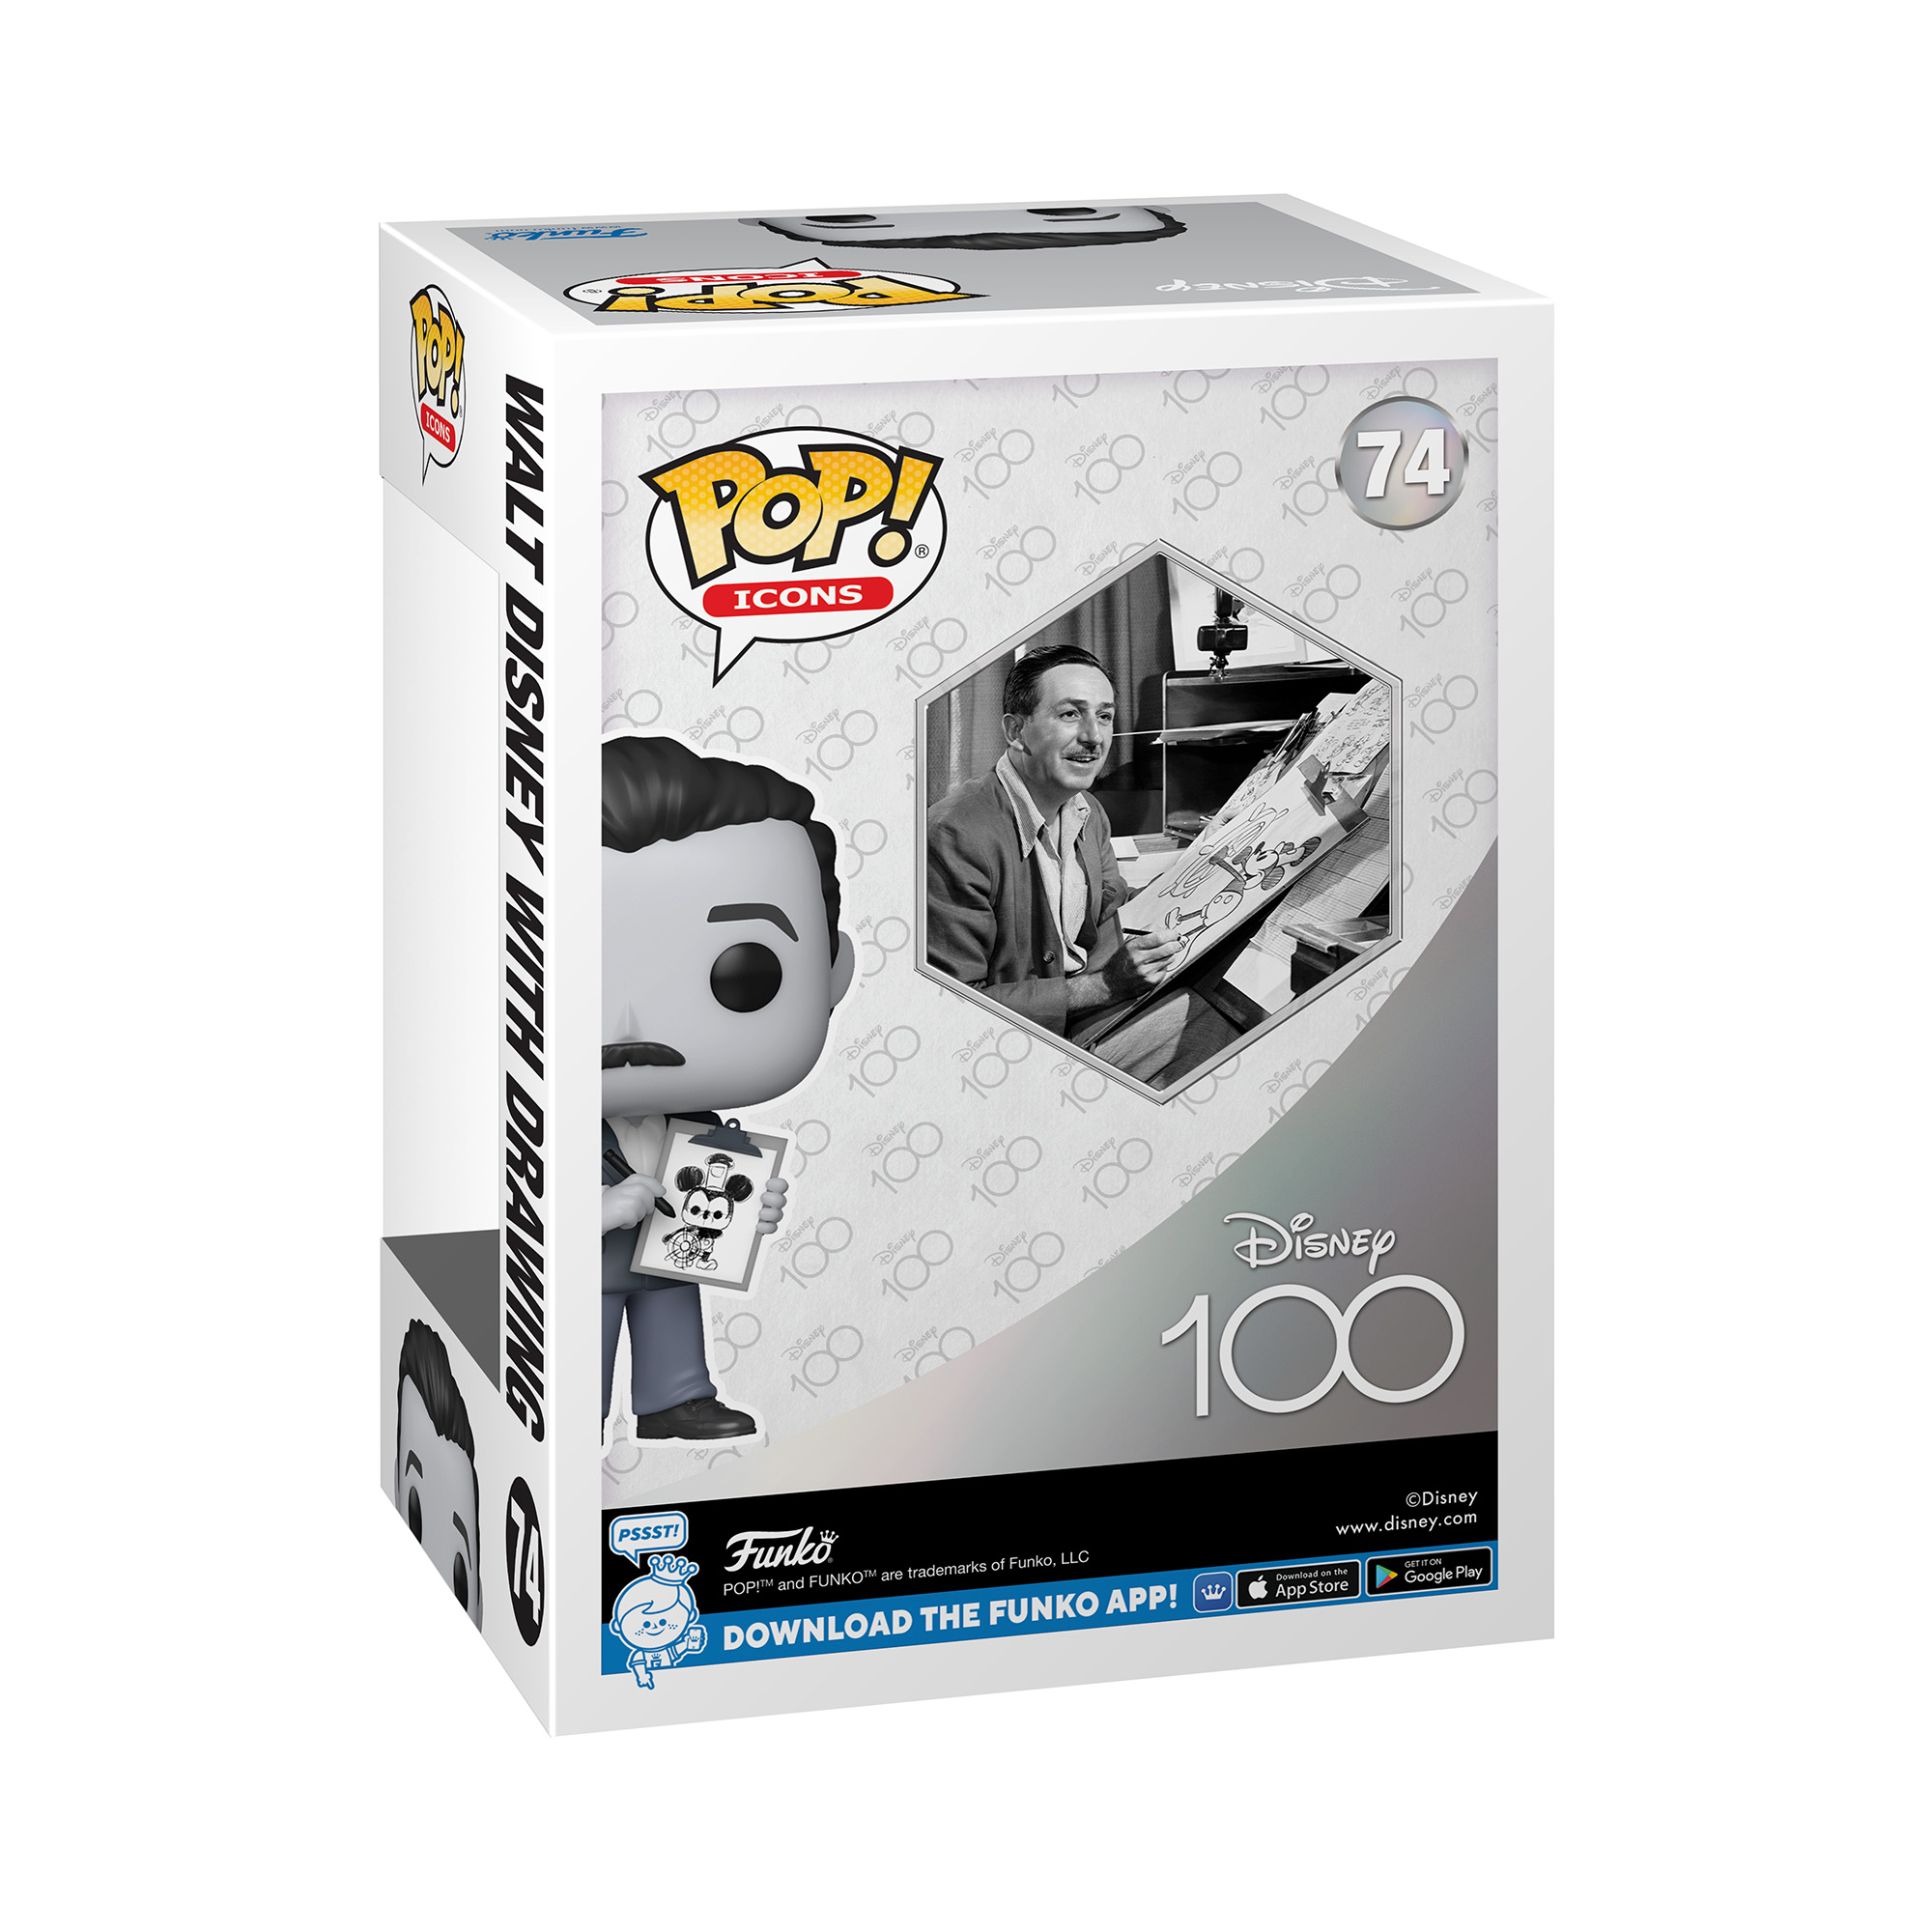 Pop! Walt Disney in Box with Photo Callout on the Back